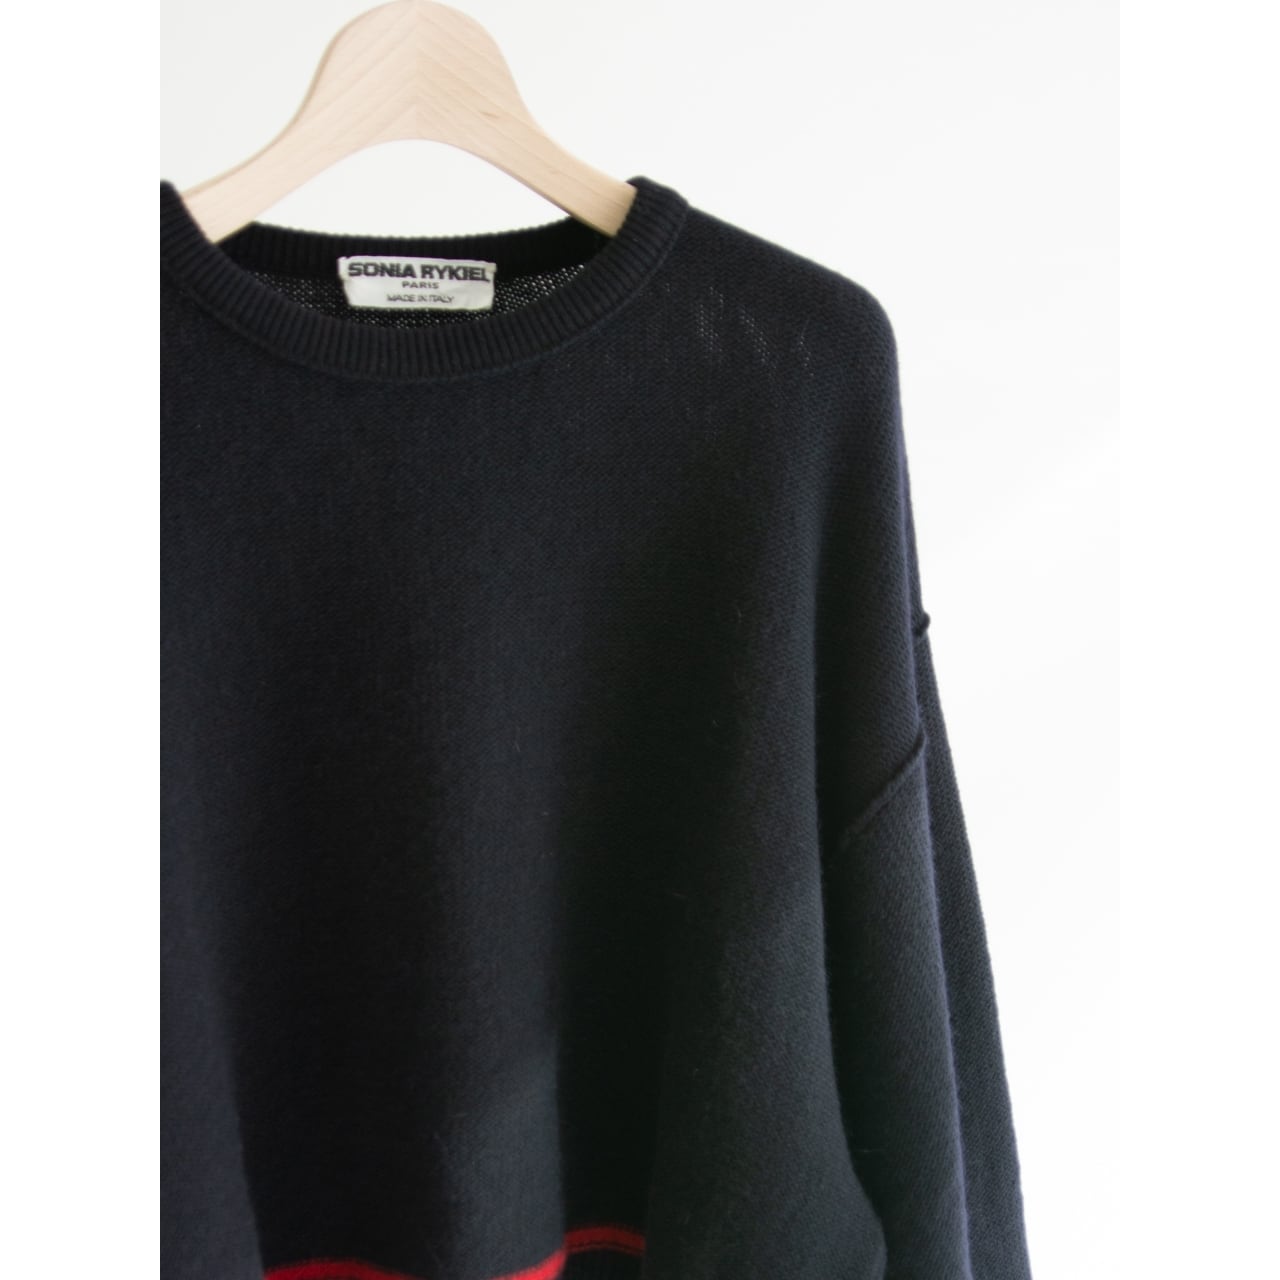 SONIA RYKIEL】Made in Italy 100% Wool Oversized Pullover Sweater